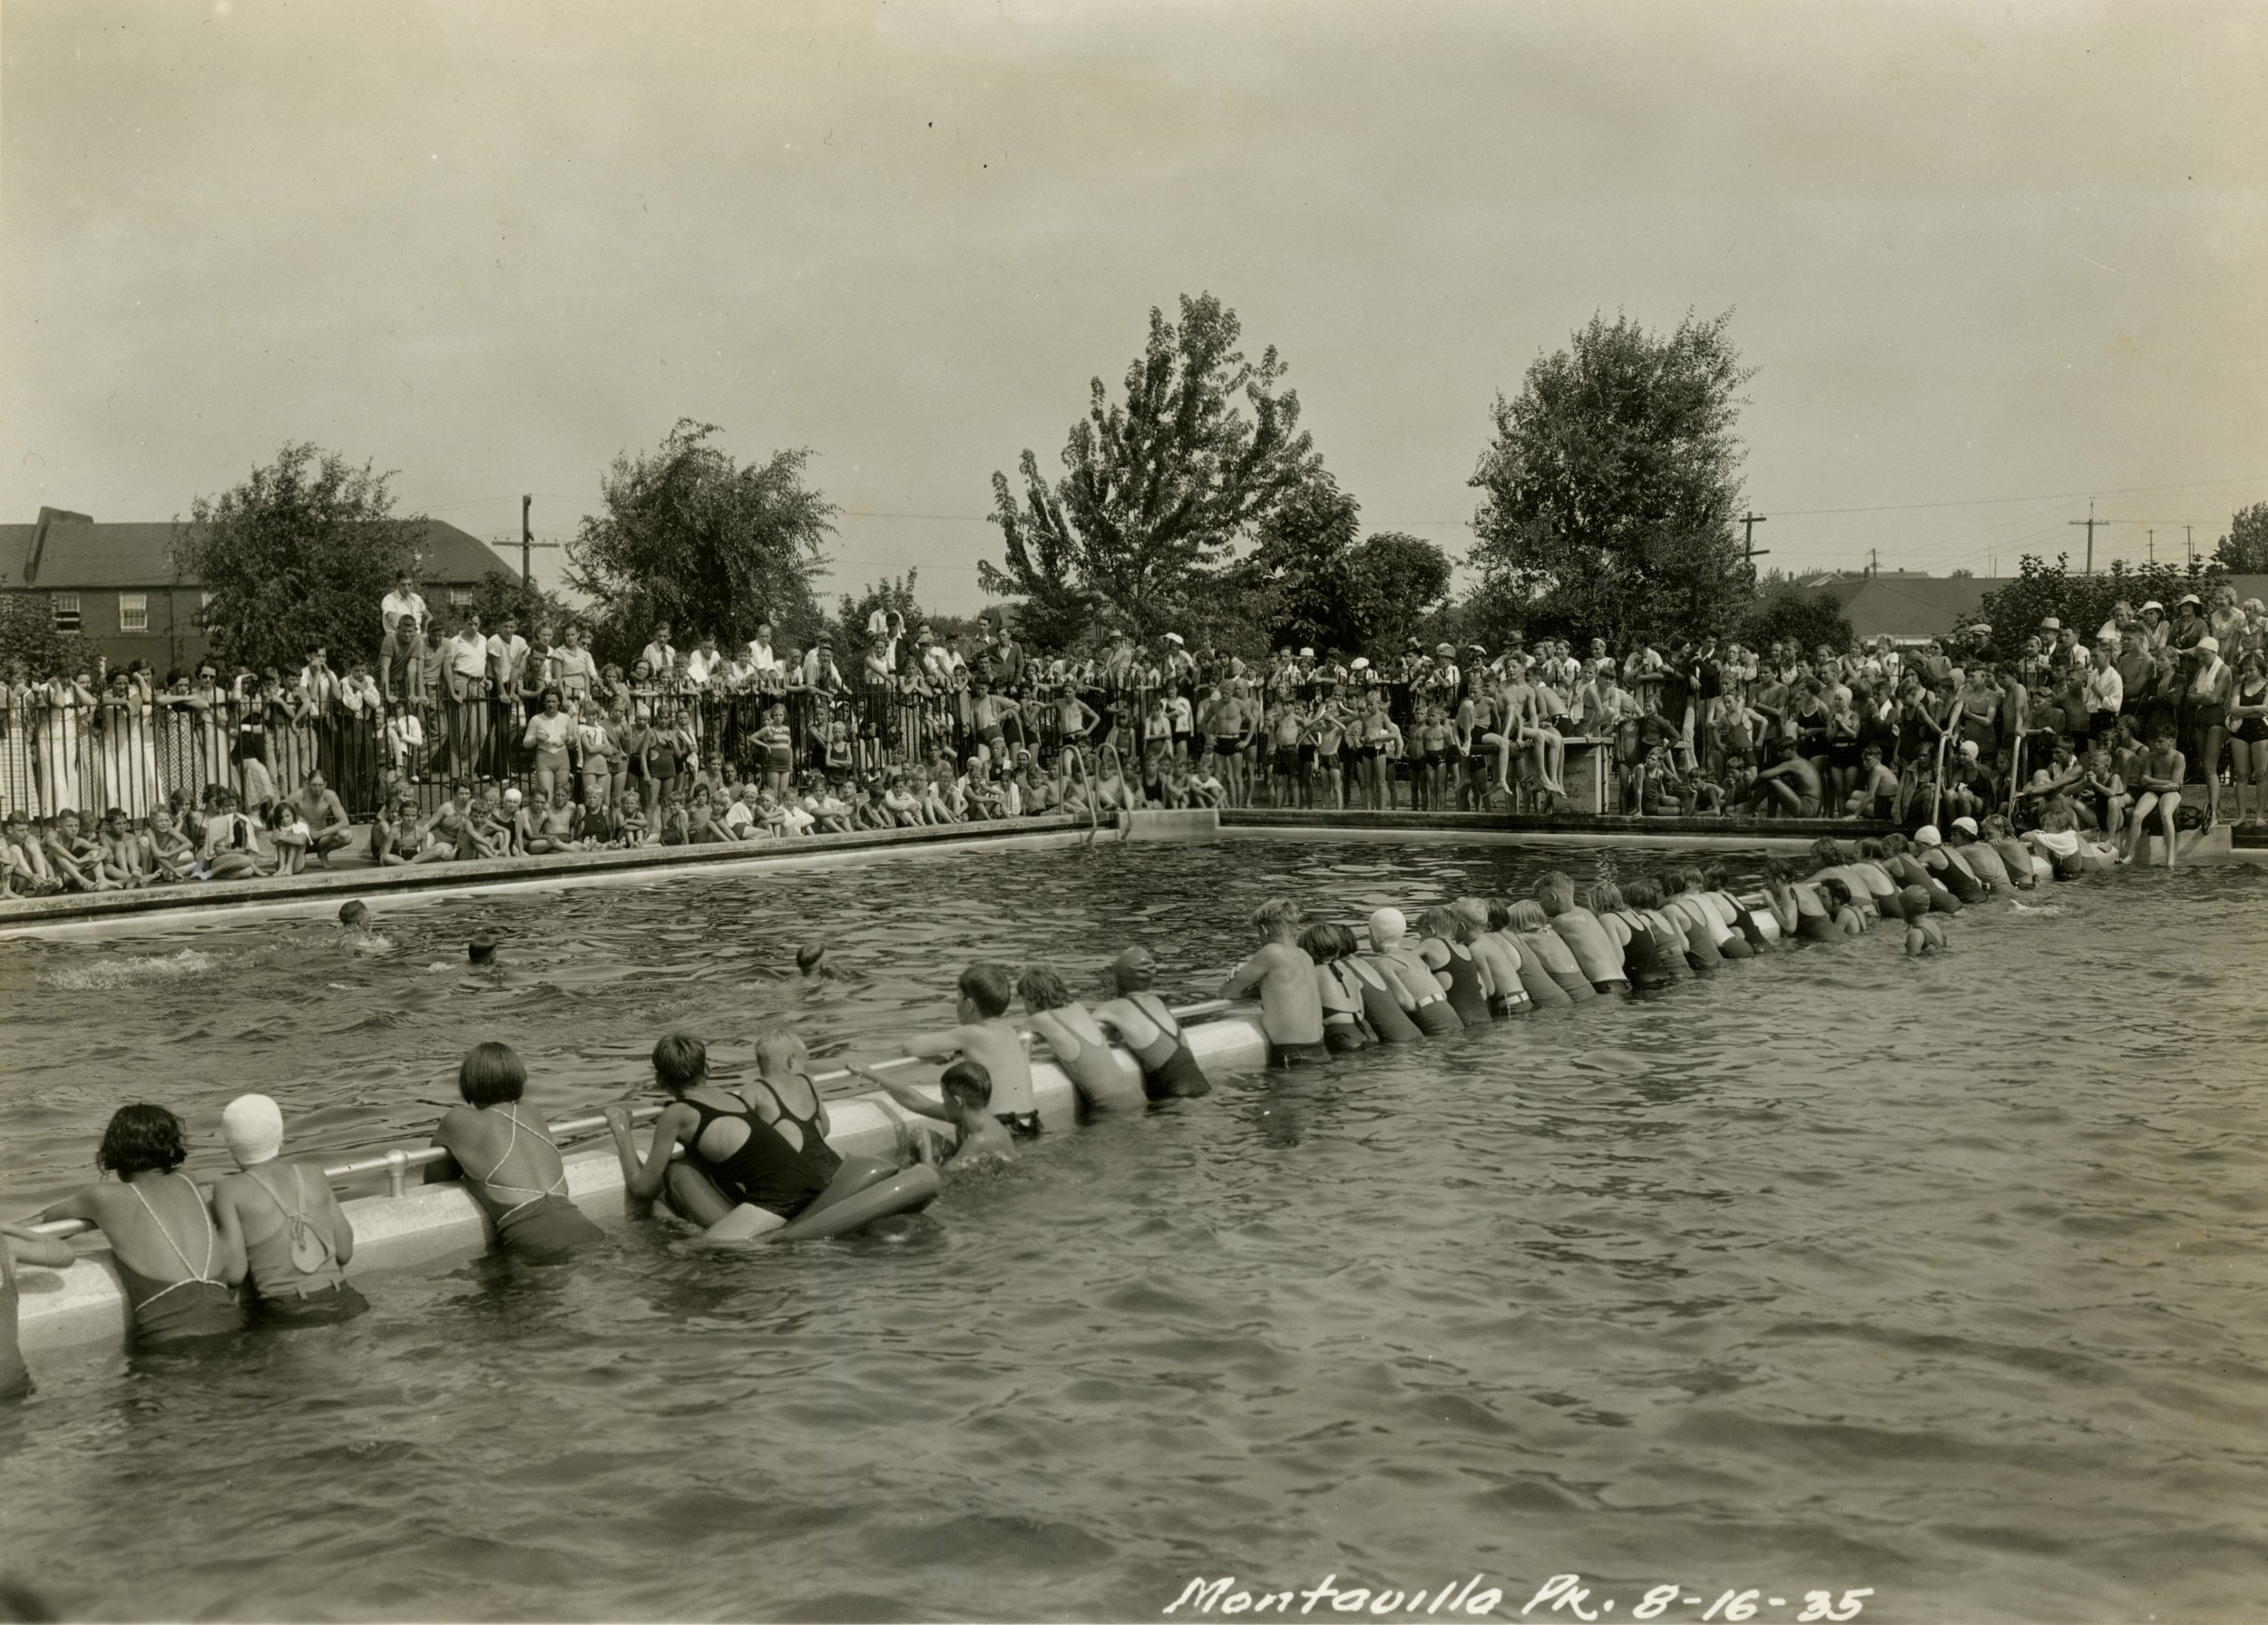 Public Works Administration (Archival) - Public Works - Public Works Relief Projects - A2000-025.1035   Huge group of children in pool at Montavilla Pk for recreational program.JPG